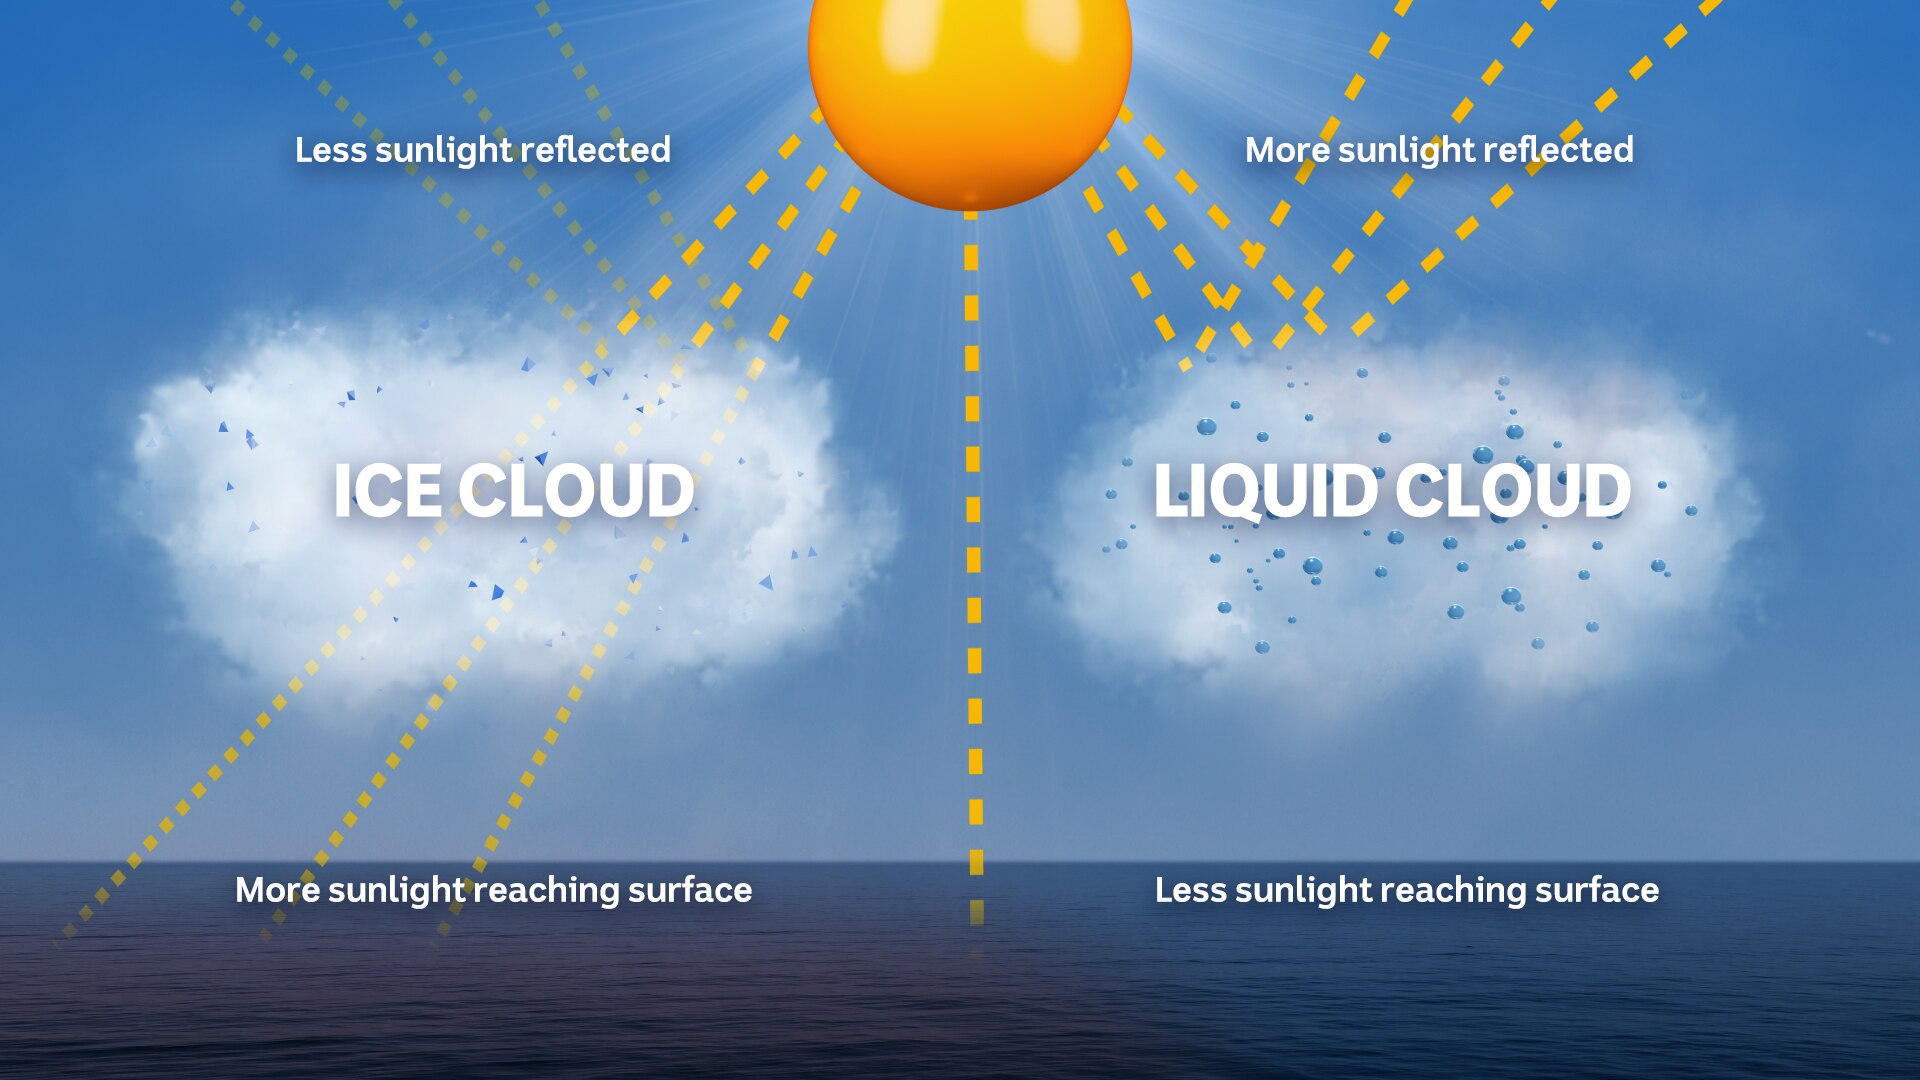 A graphic of the impact of ice clouds and liquid clouds on sunlight refraction.